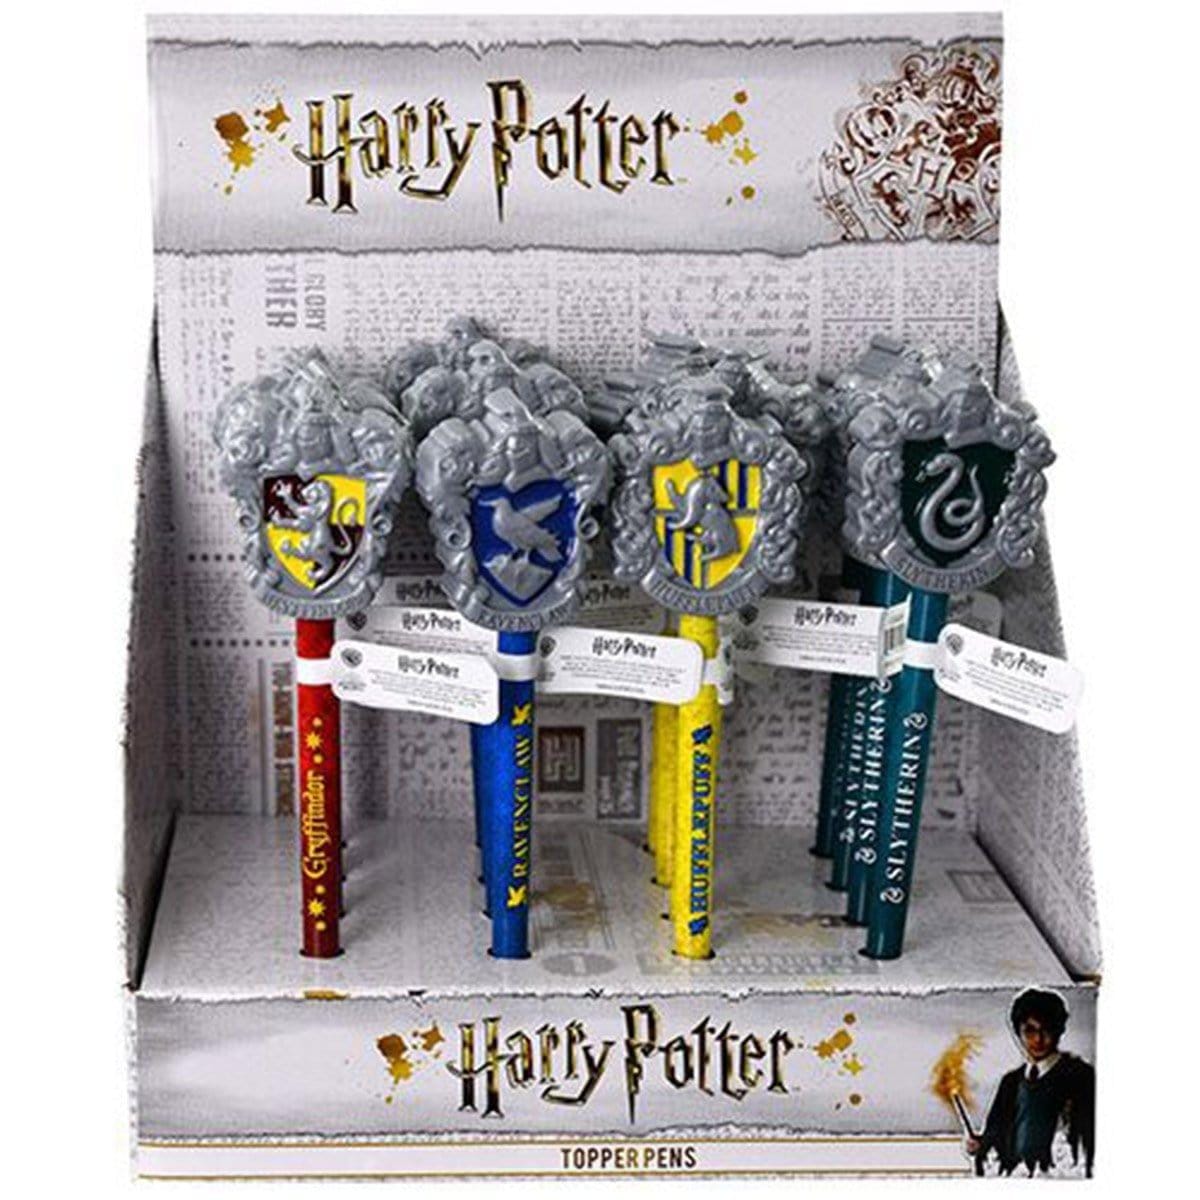 Buy Kids Birthday Harry Potter pen with house topper - Assortment sold at Party Expert